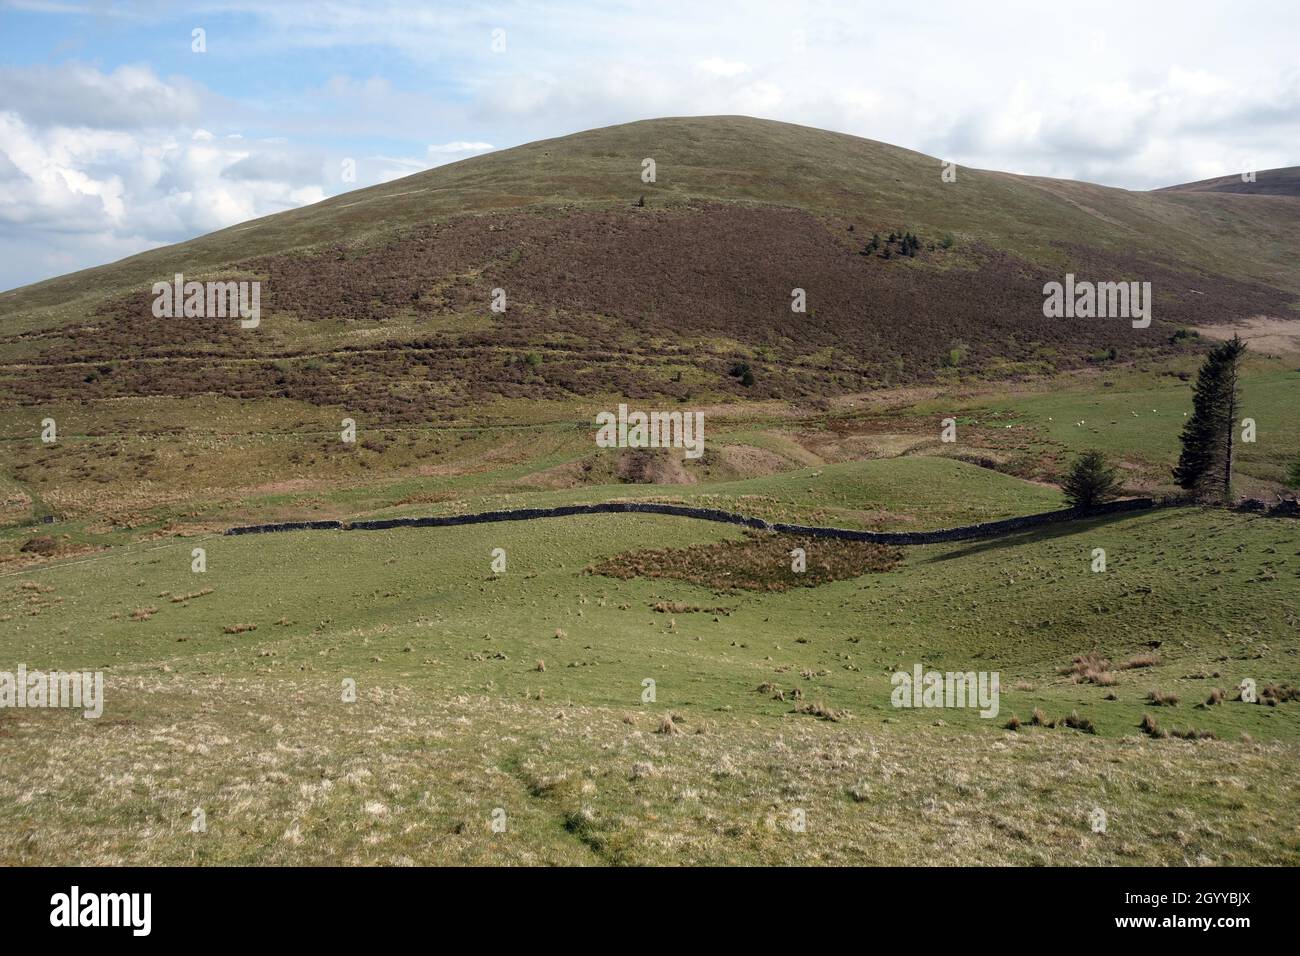 The Birkett 'Owsen Fell' from near the Summit of 'High Hows' in the Lake District National Park, Cumbria, England, UK Stock Photo